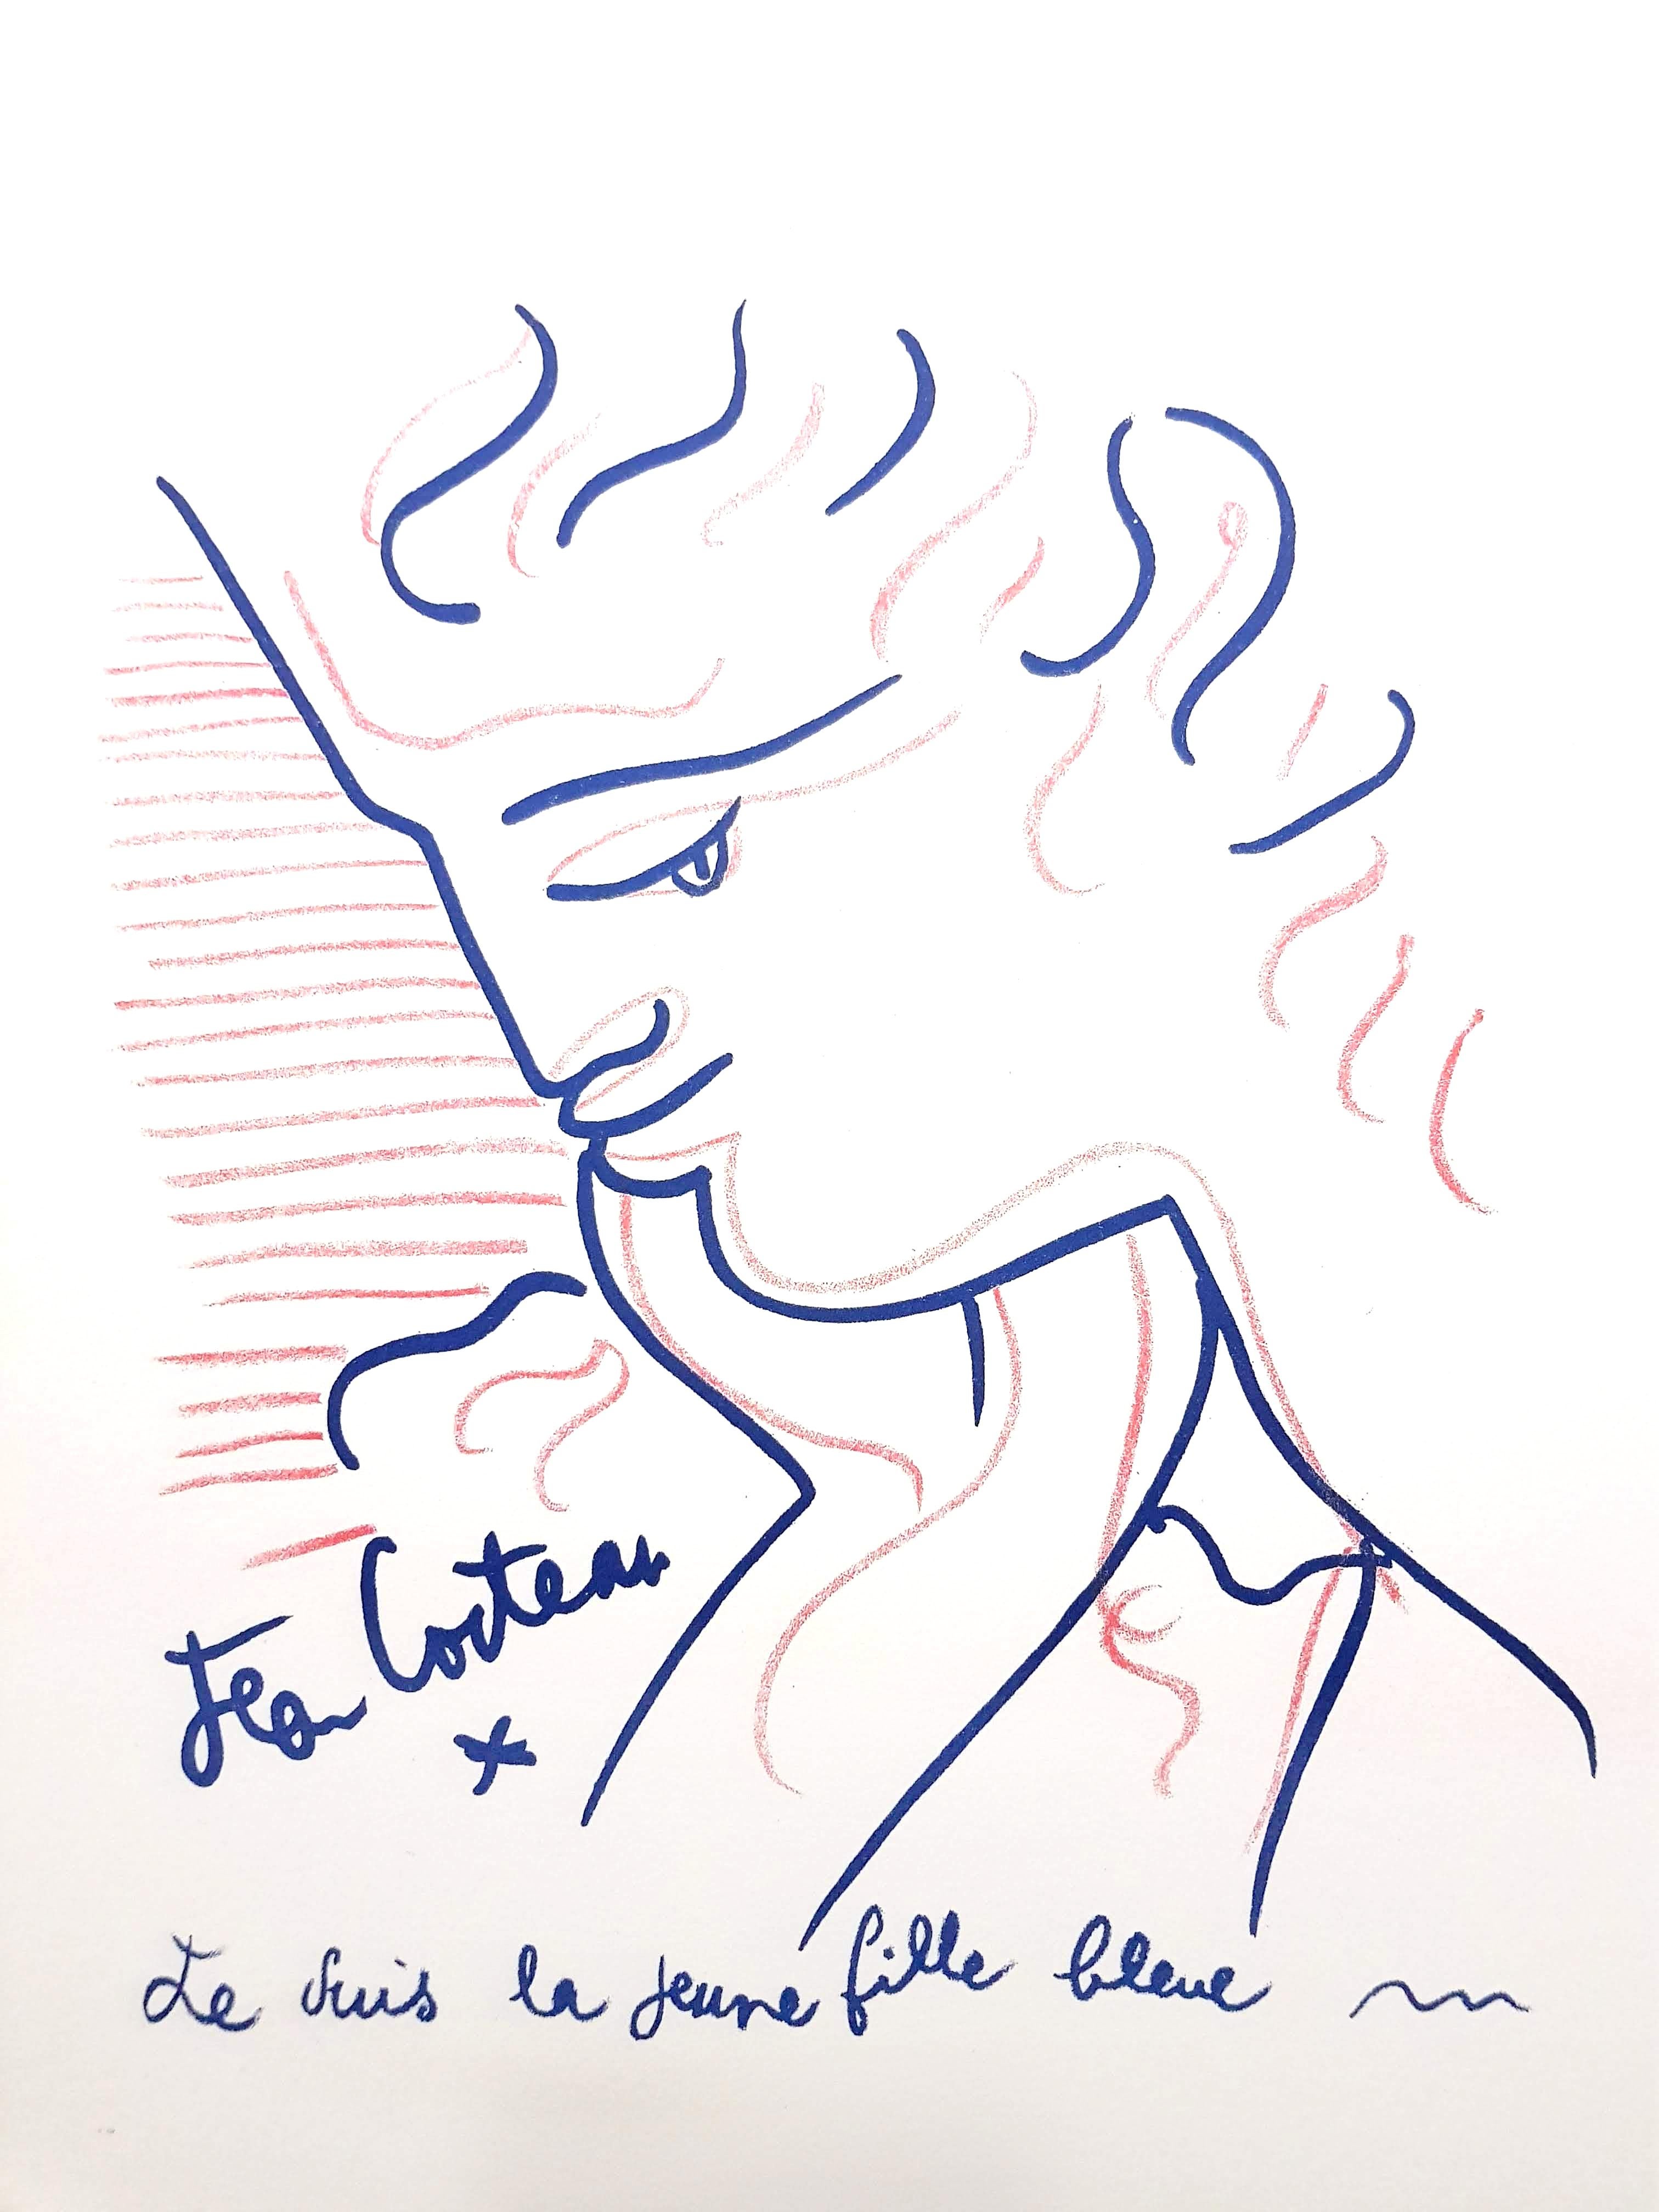 Original Lithograph by Jean Cocteau
Title: Blue Lady 
Signed in the plate
Dimensions: 32 x 25.5 cm
Edition: 200
1959
Publisher: Bibliophiles Du Palais
Unnumbered as issued